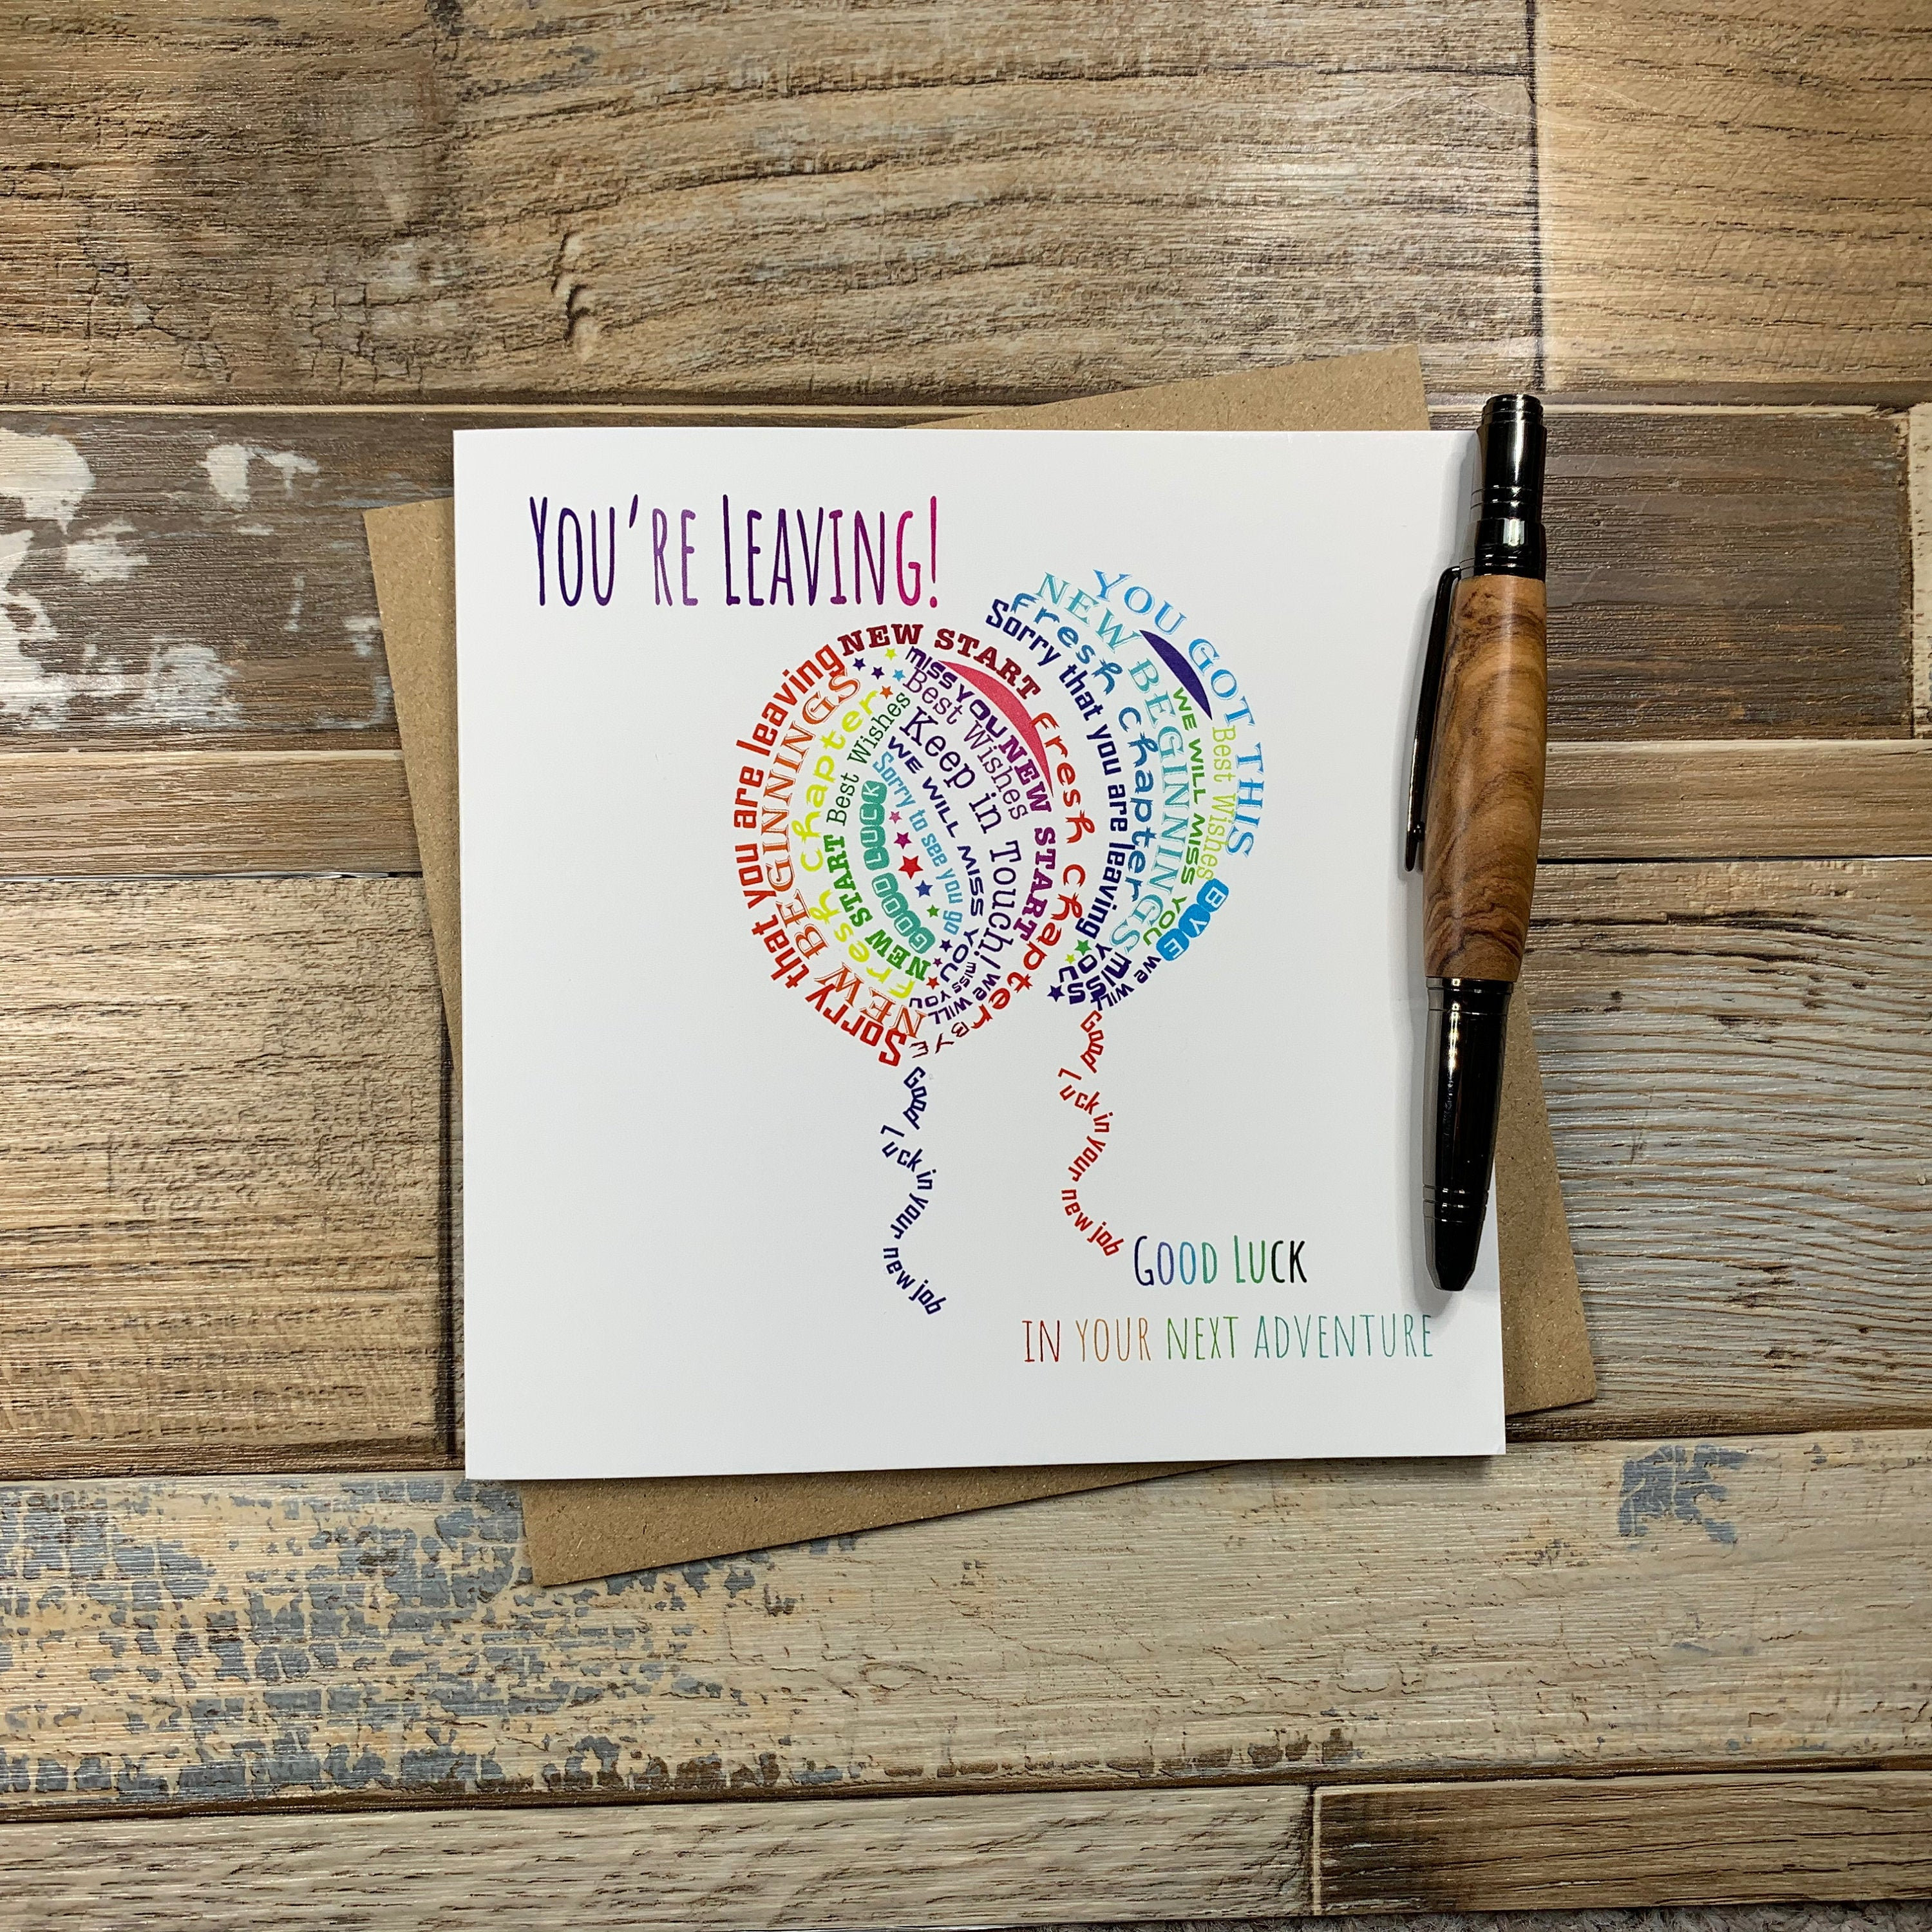 Design　Can　Be　Word　Card　Leaving　Wordle　Balloons　Art　Etsy　日本